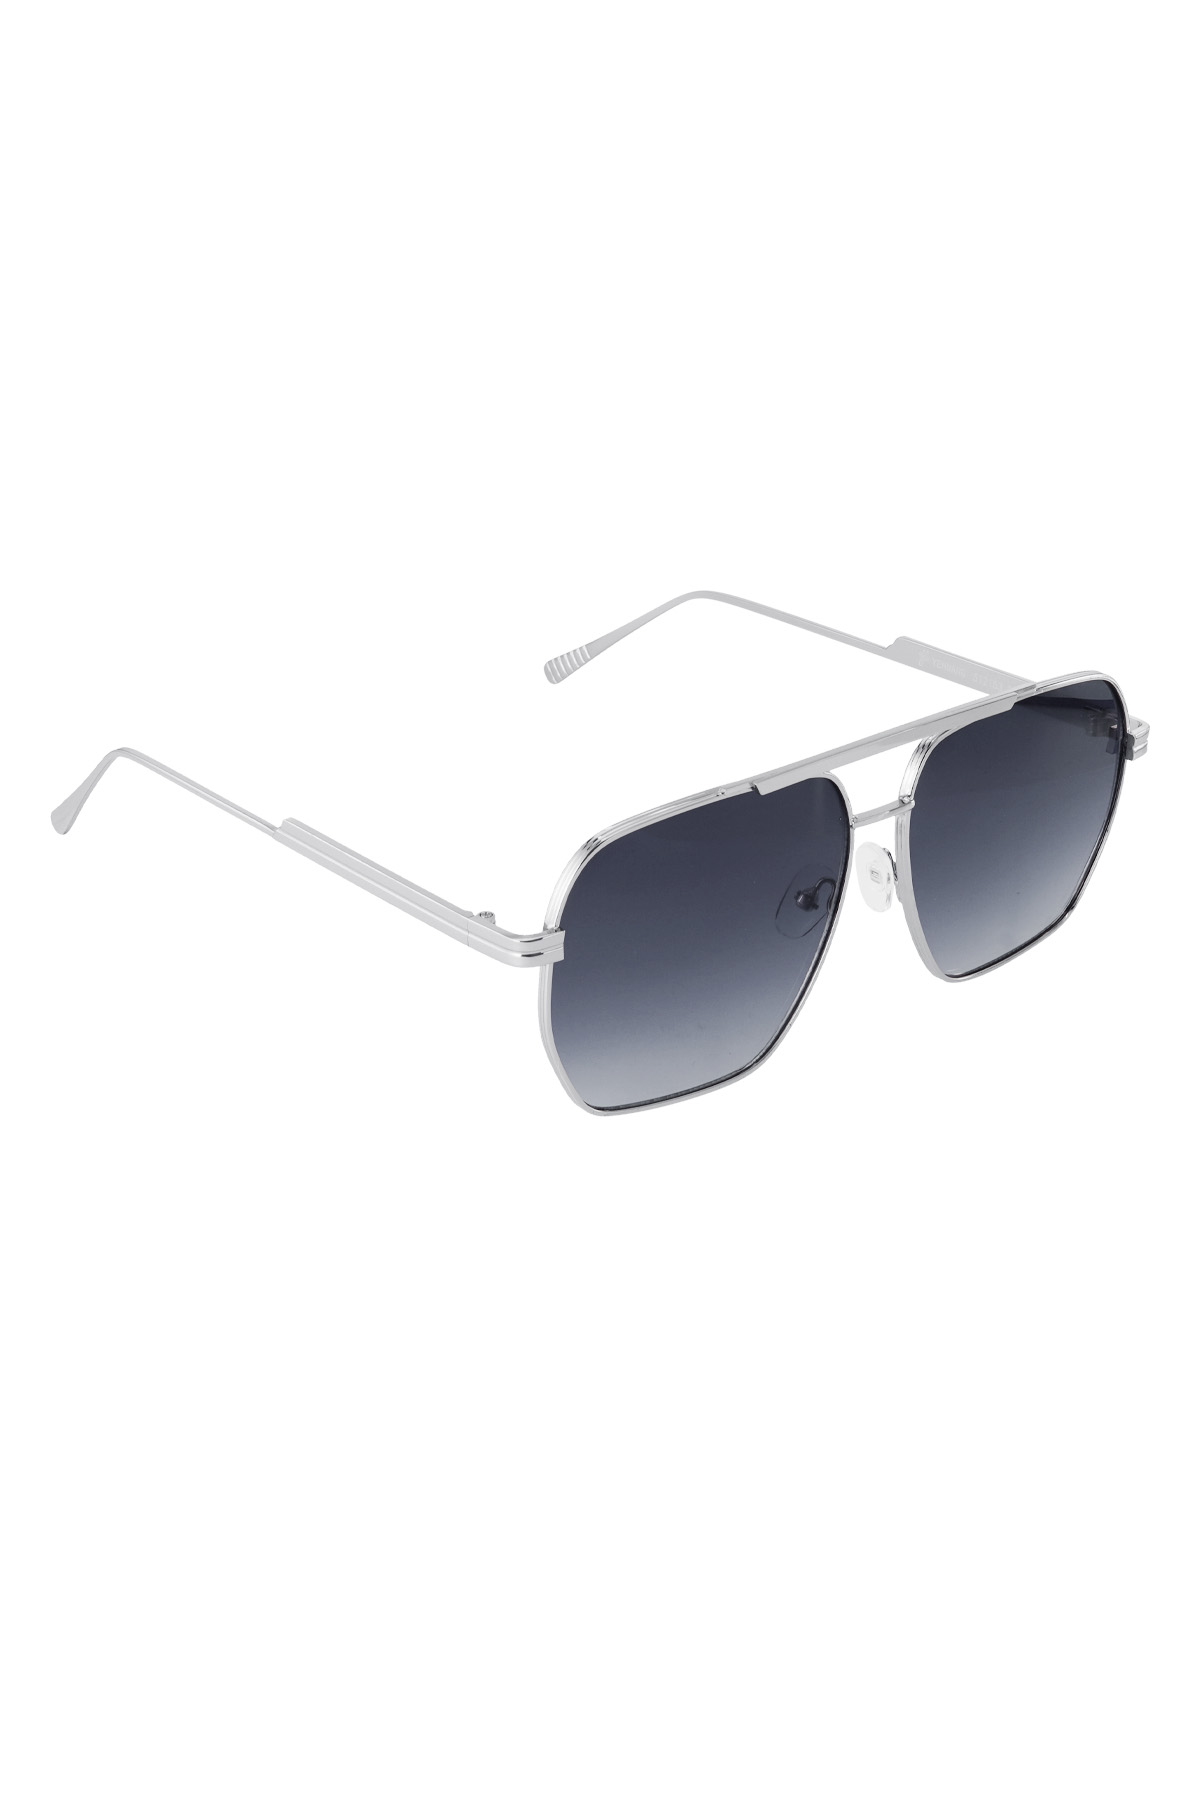 Metal summer sunglasses - Black and silver